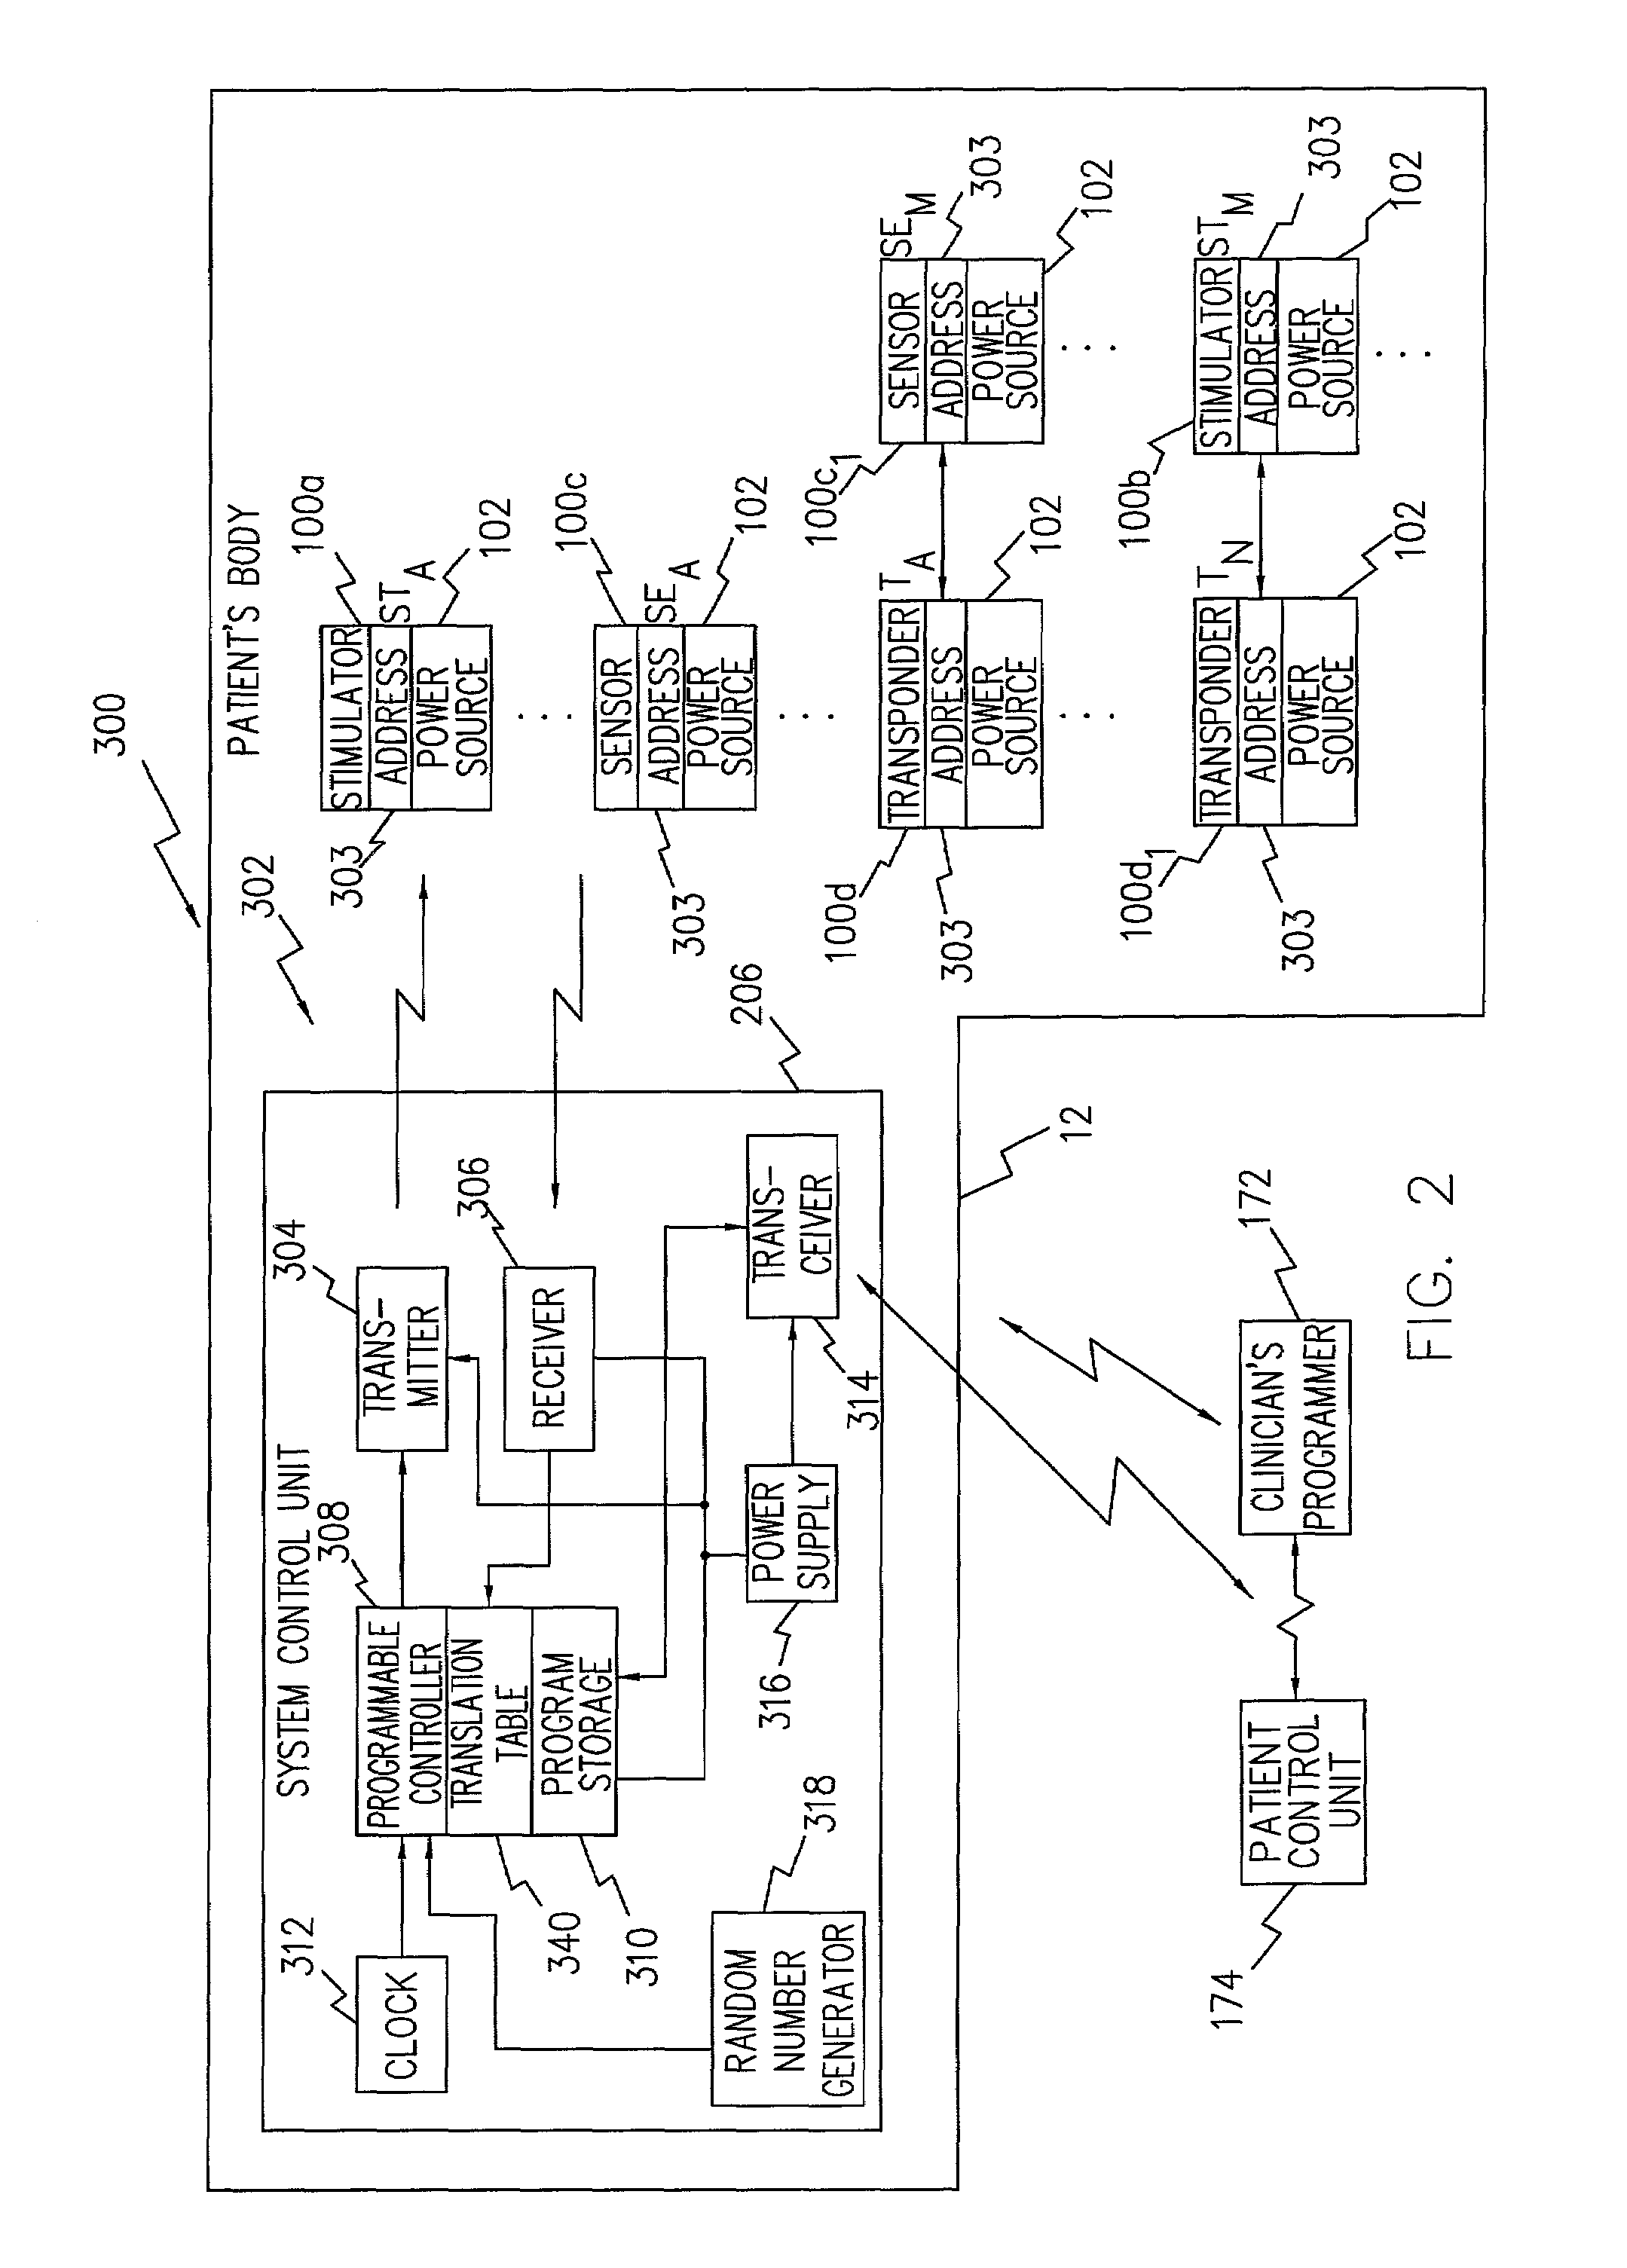 Pulsed magnetic control system for interlocking functions of battery powered living tissue stimulators